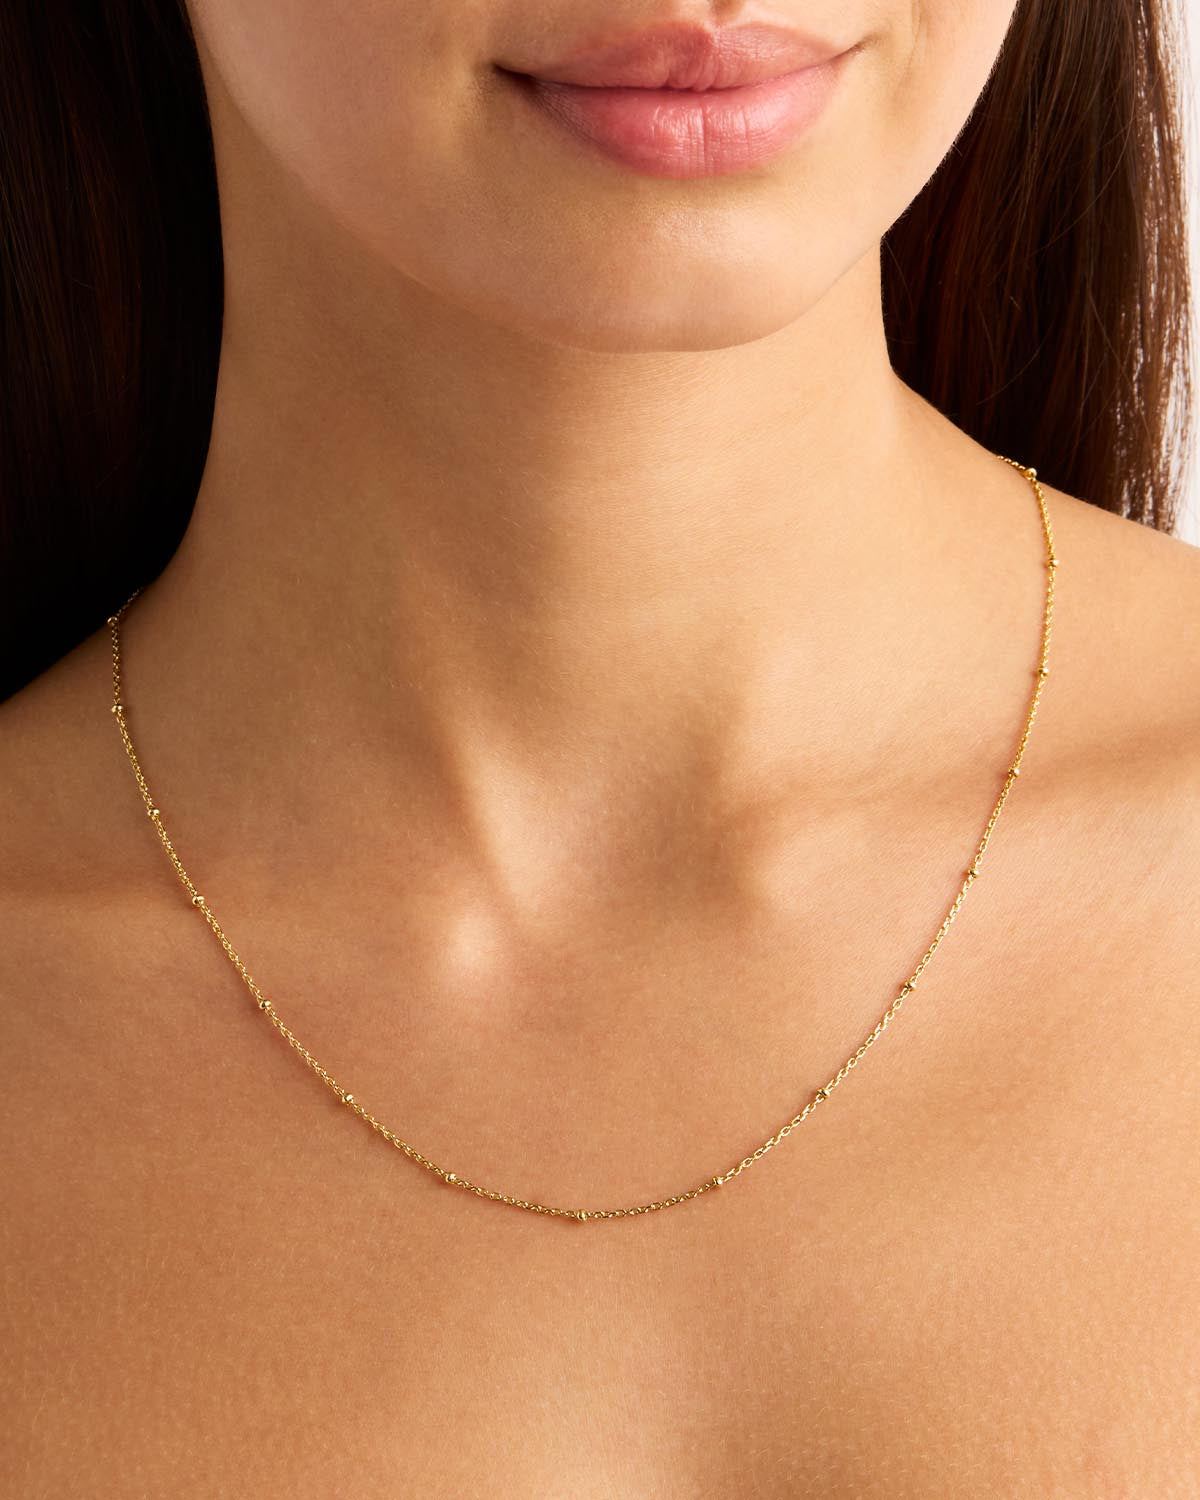 Buy 14K Solid Yellow Gold 1mm Rope Chain Necklace - 18 Inches at Amazon.in